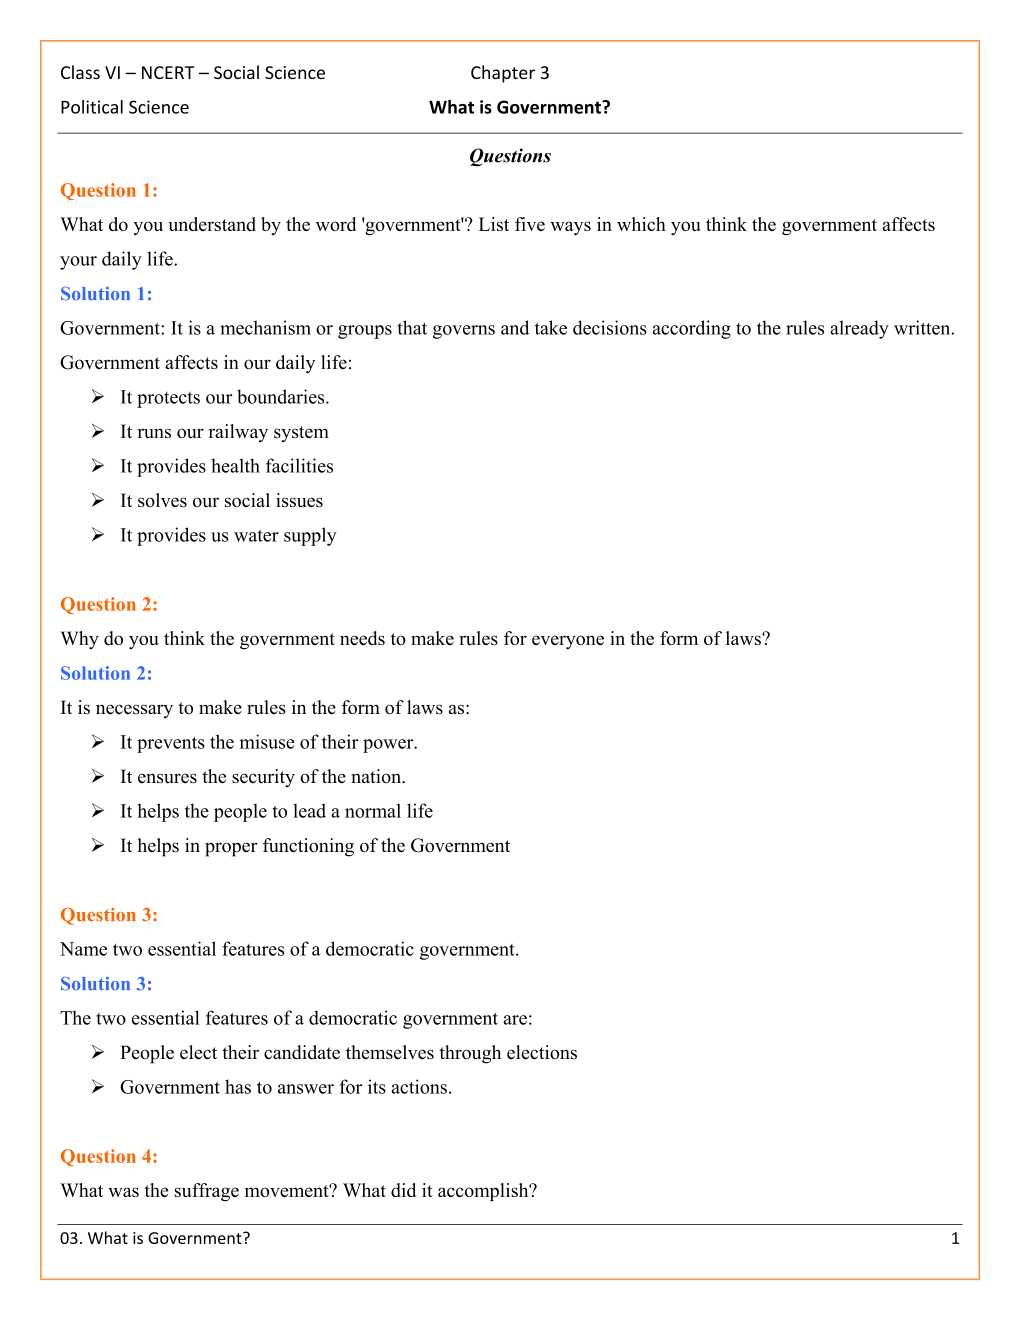 NCERT Solutions For Class 6 Social Science - Social and Political Life Chapter 3